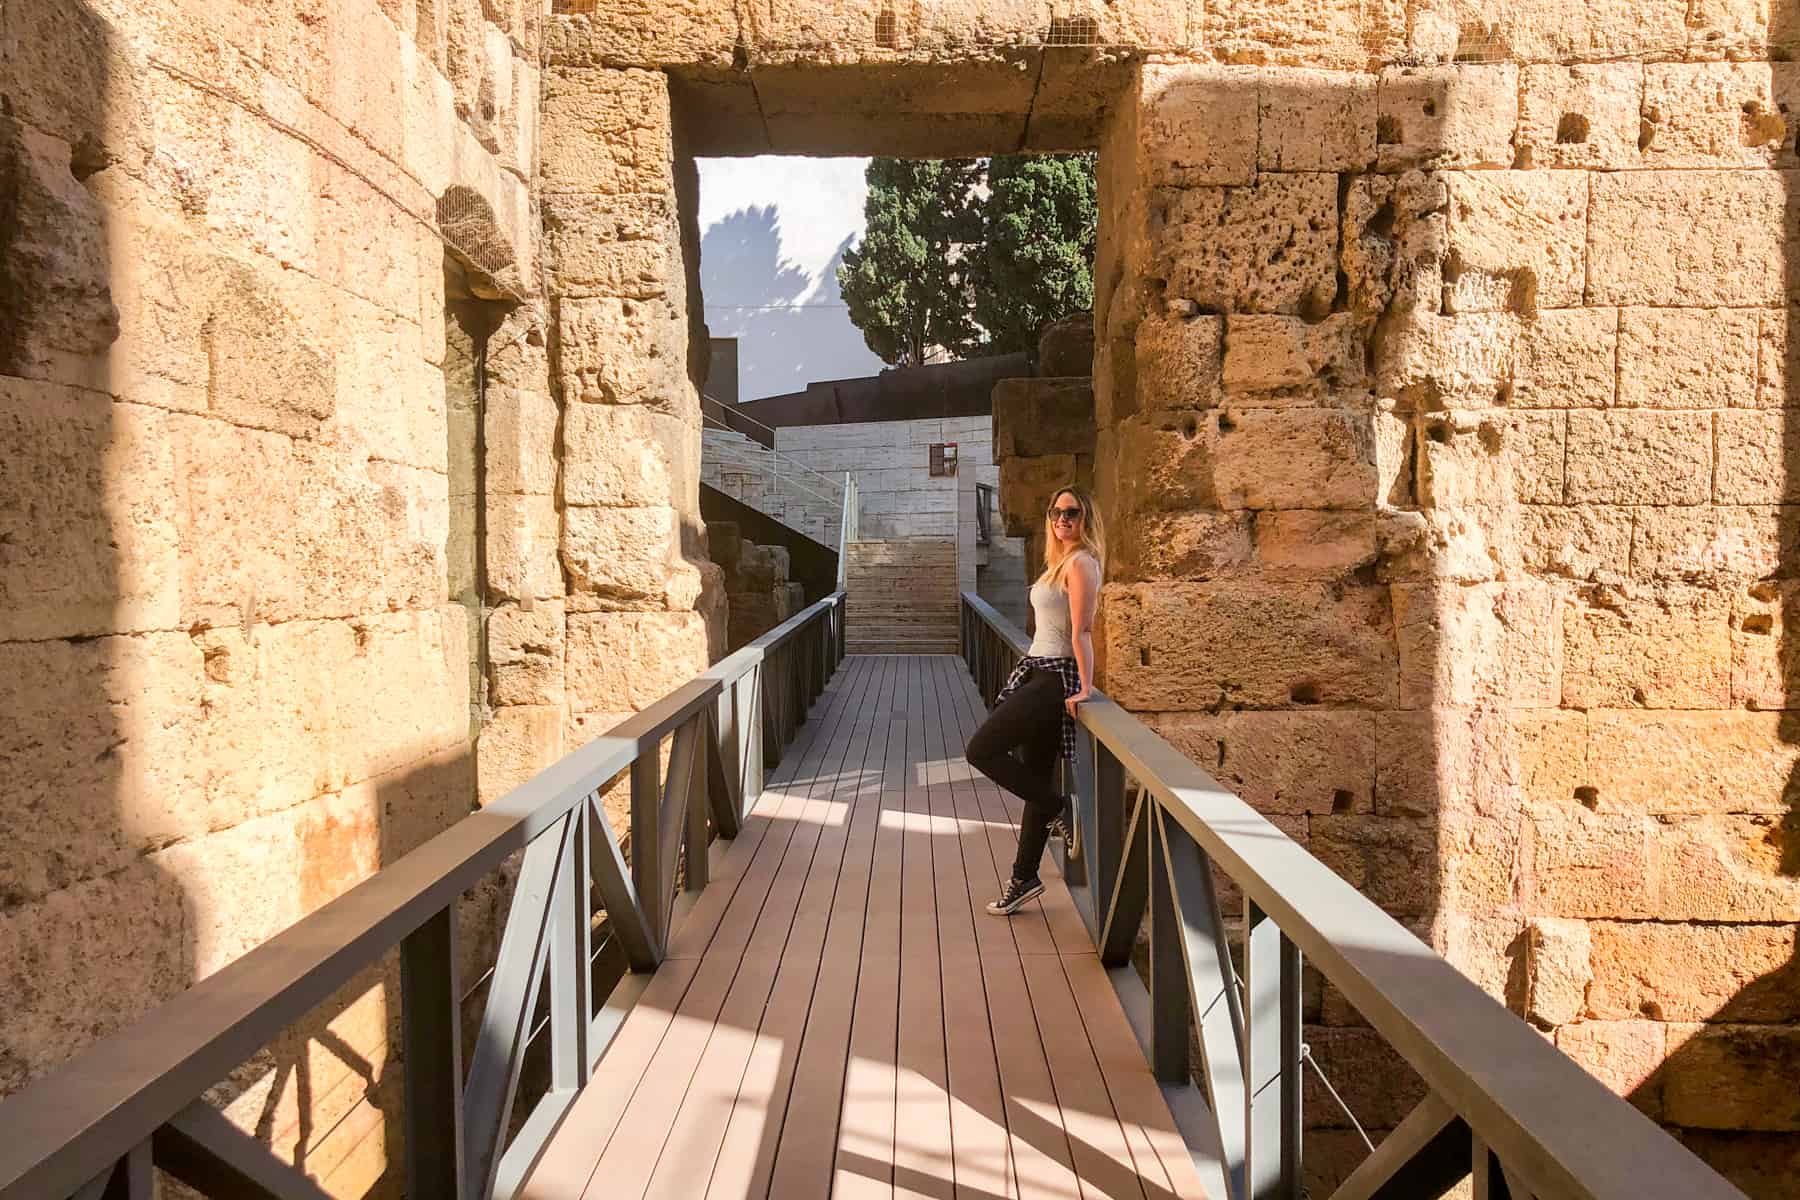 A woman leans on a wooden barriers in a golden stone square doorway, inside the Roman Circus of Tarragona Spain 